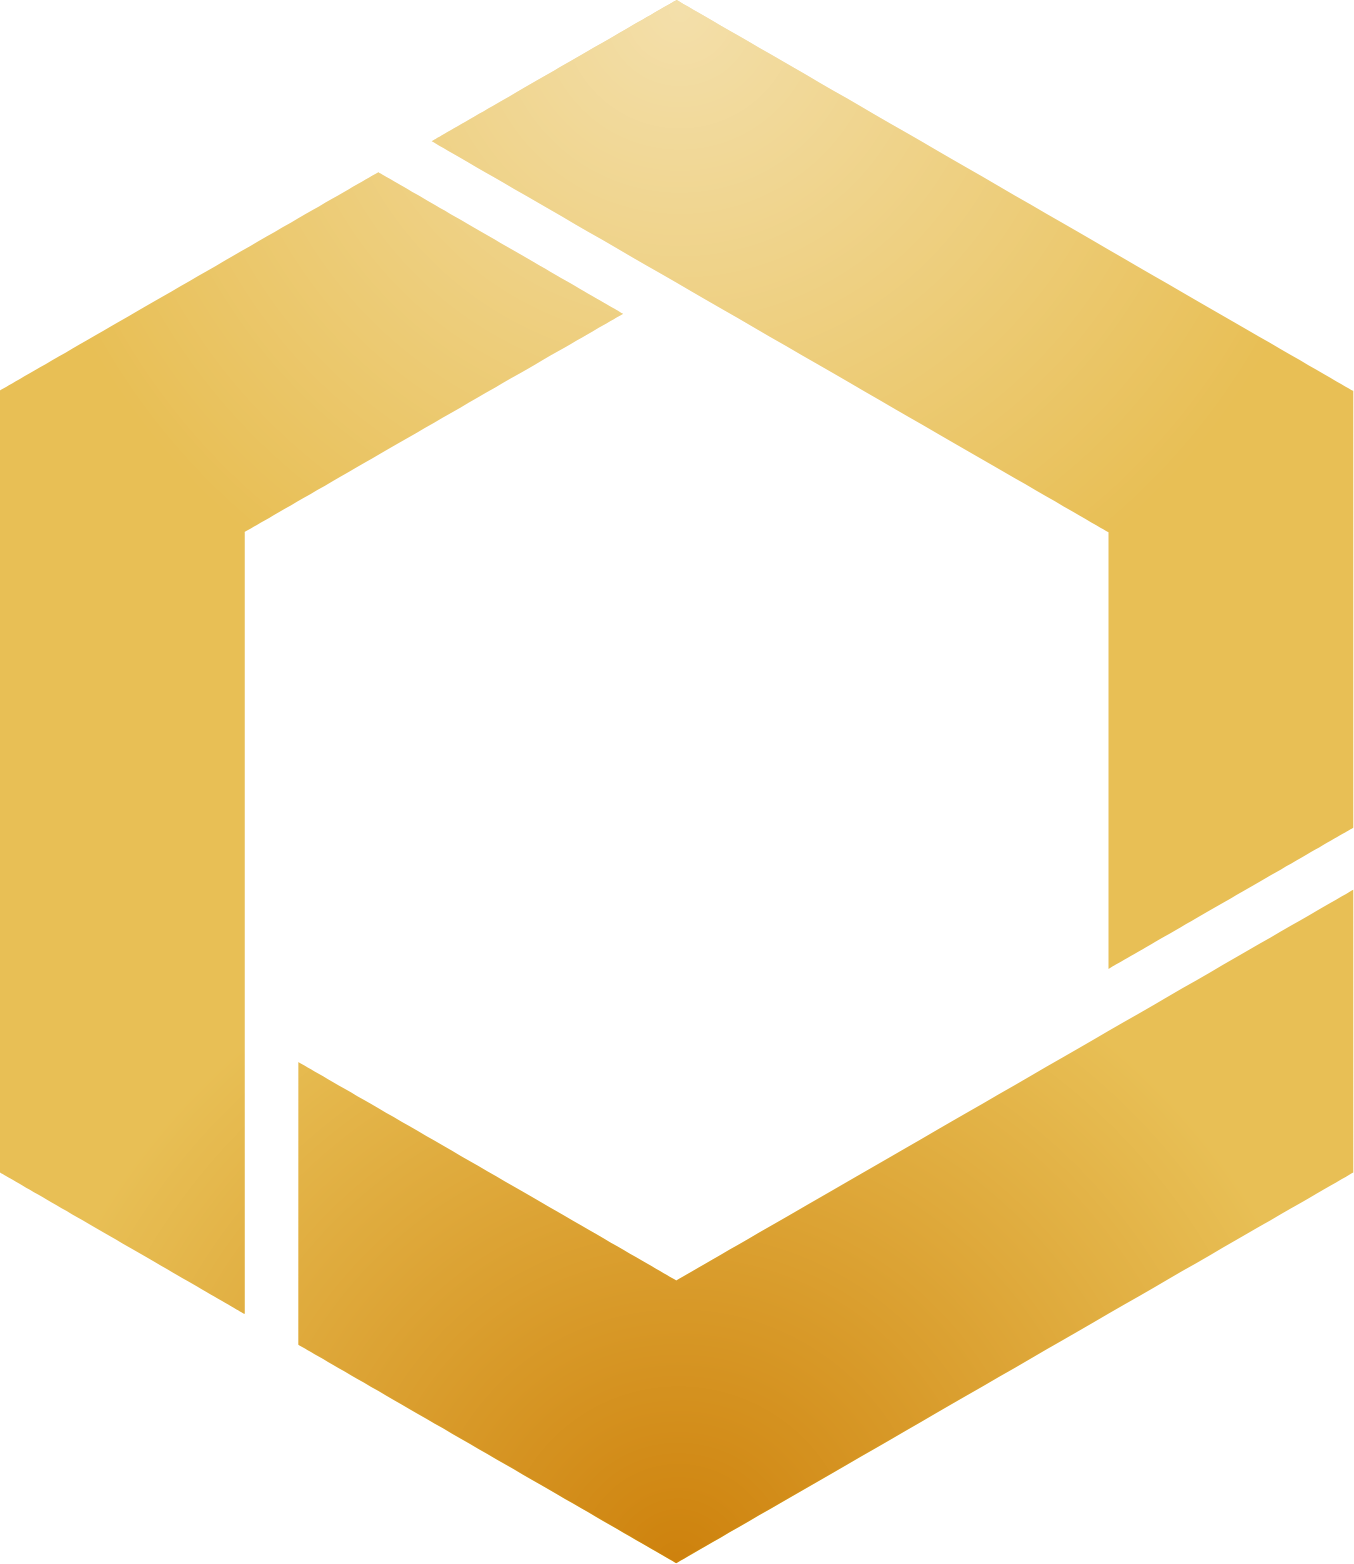 Orosur Mining logo in transparent PNG and vectorized SVG formats